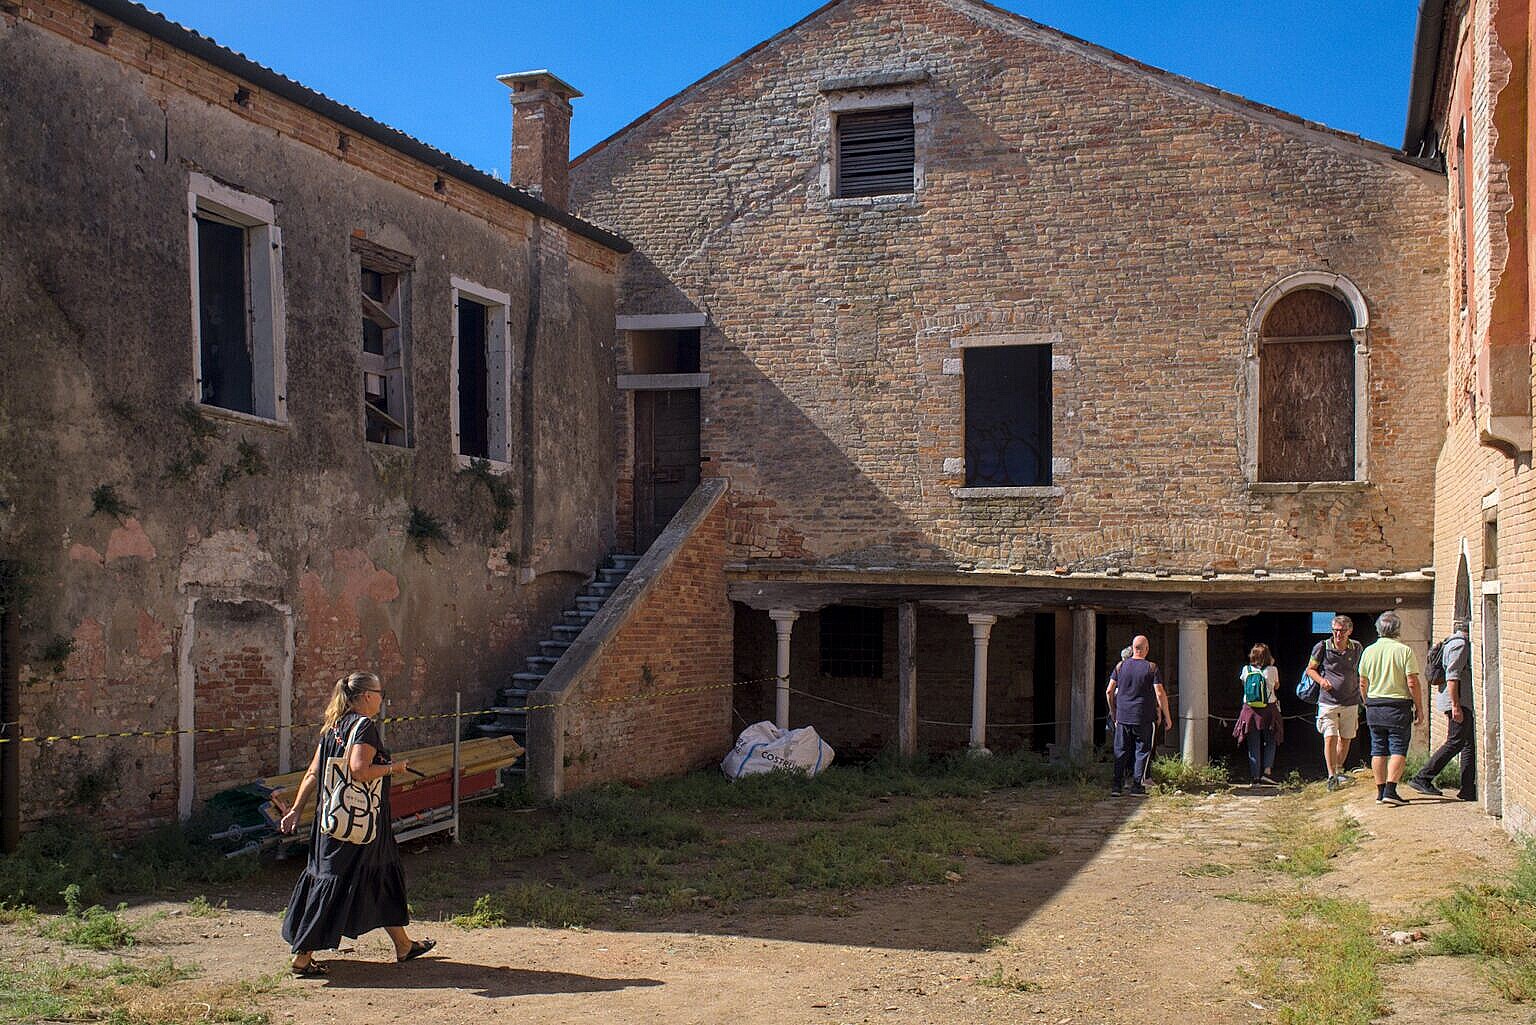 The house and courtyard of the prior of the Lazzaretto Vecchio